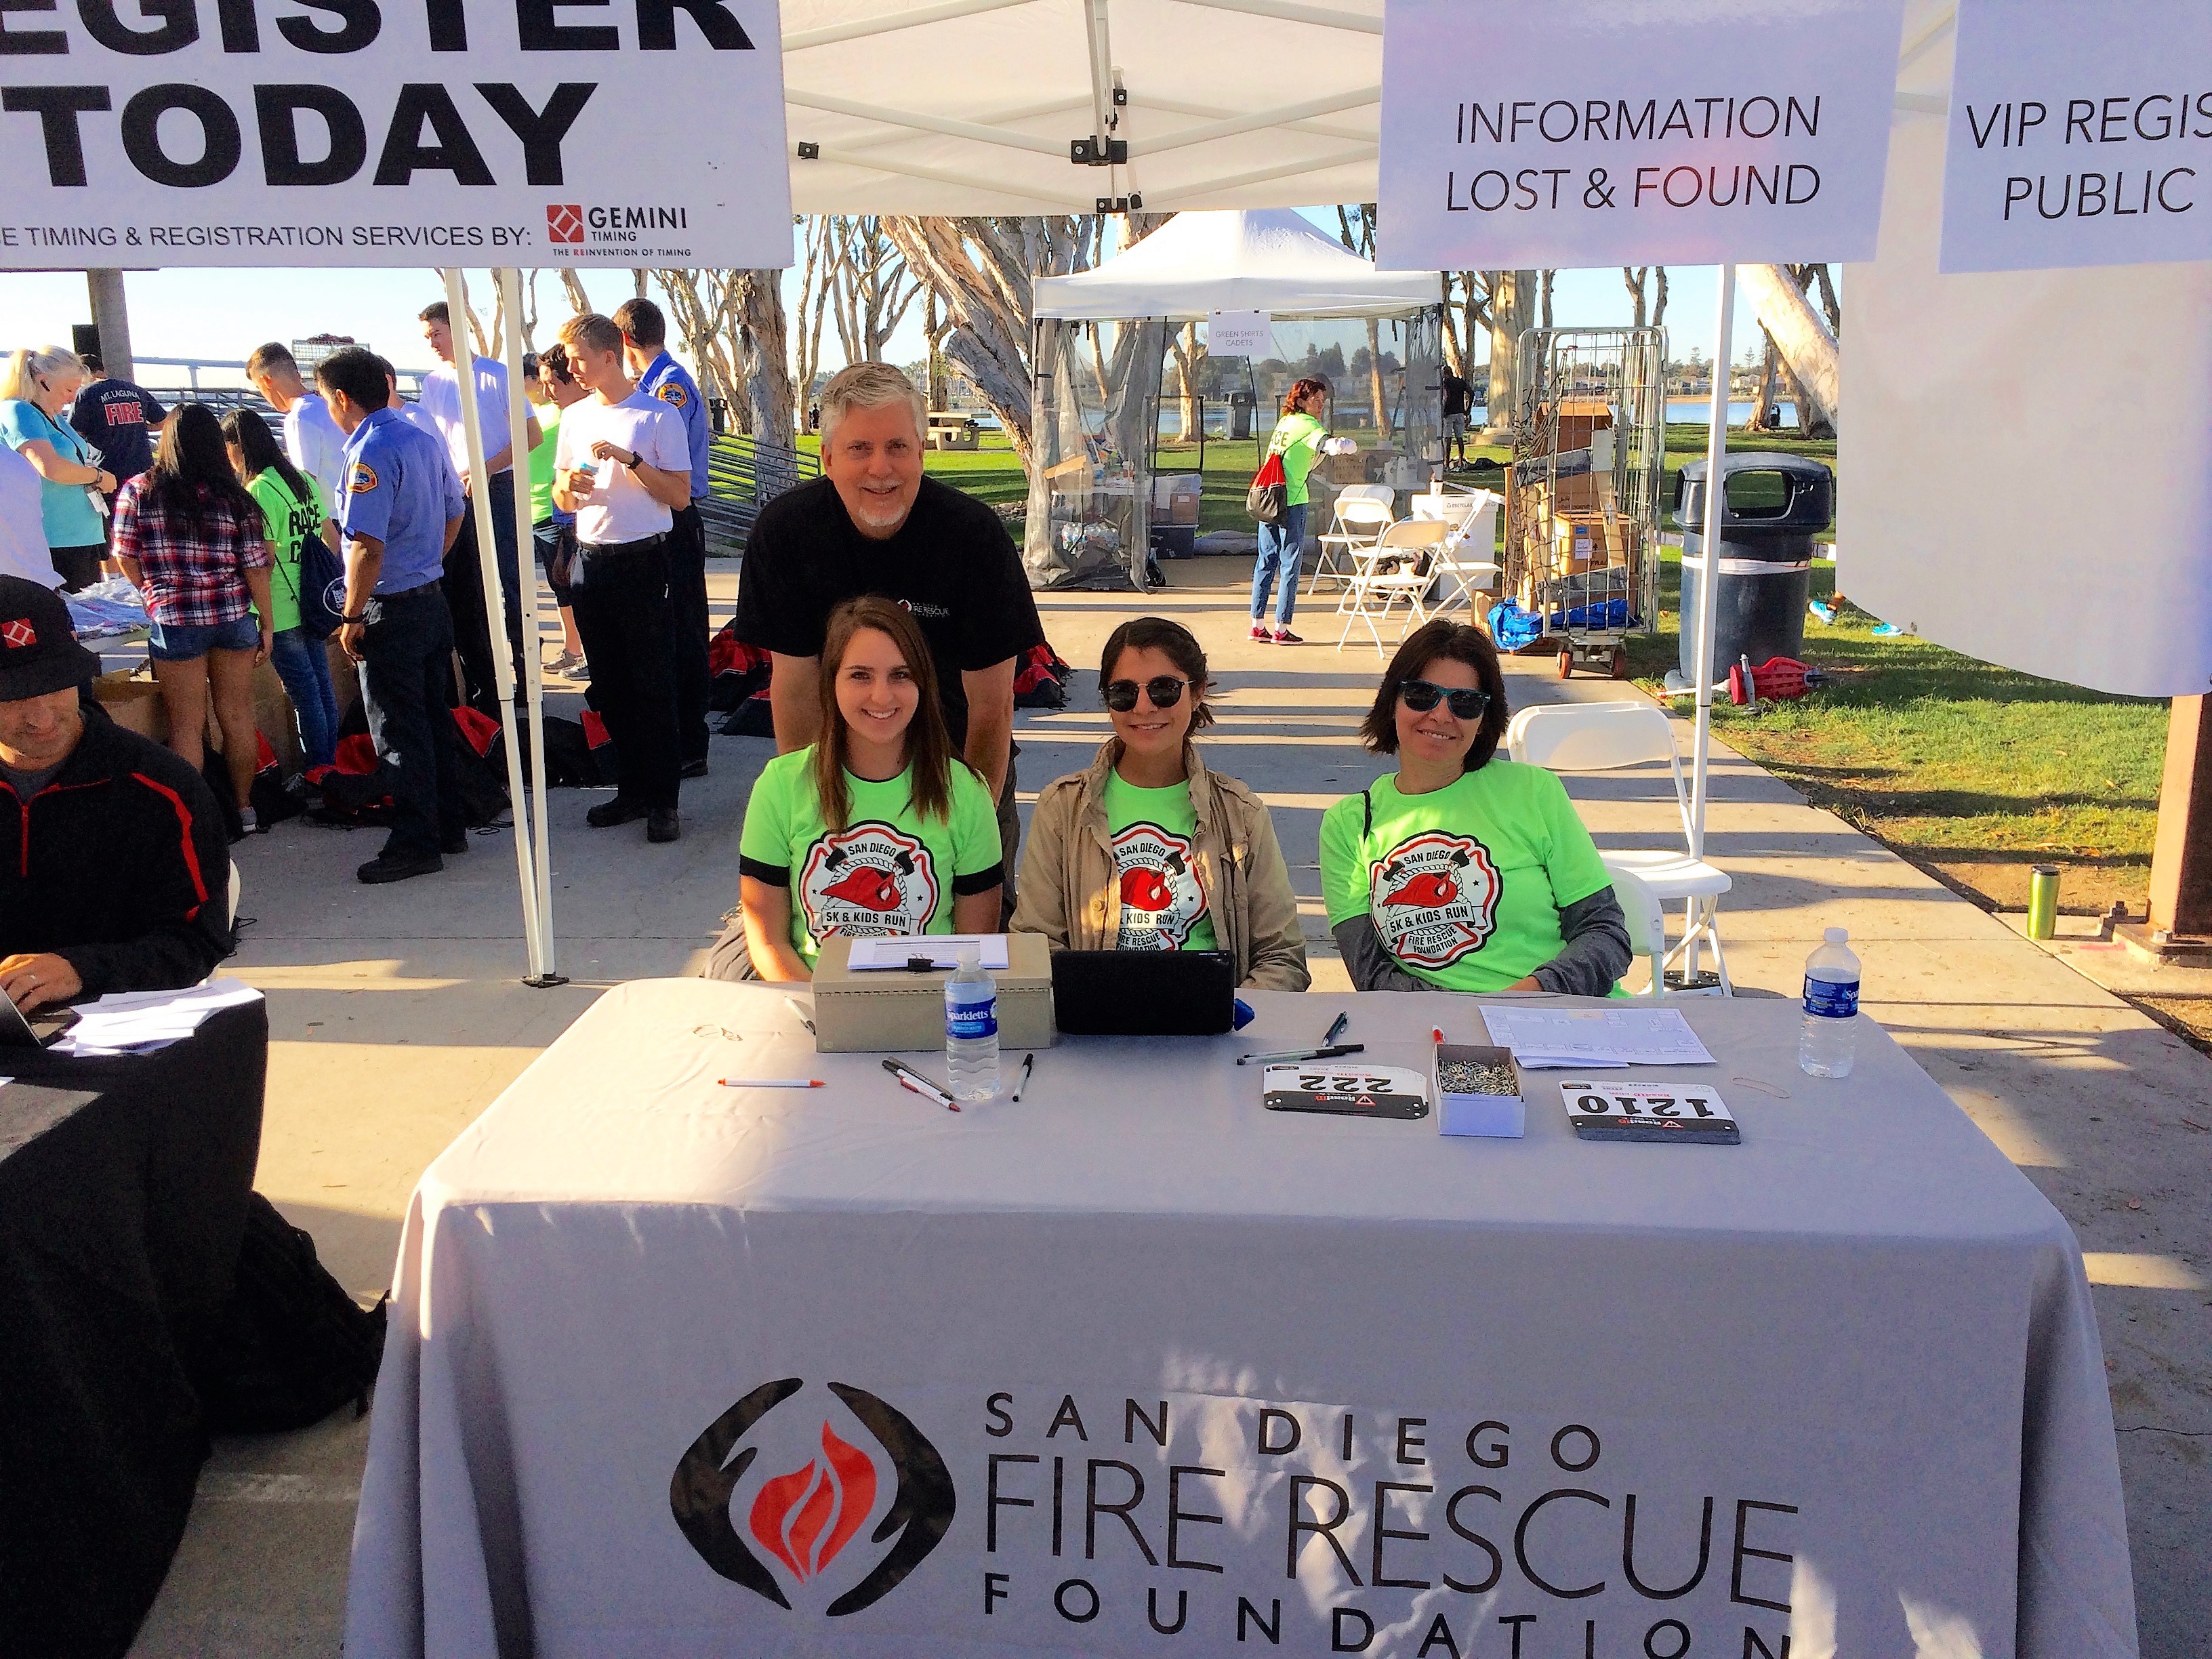 San Diego Fire Rescue Foundation volunteers at 5K